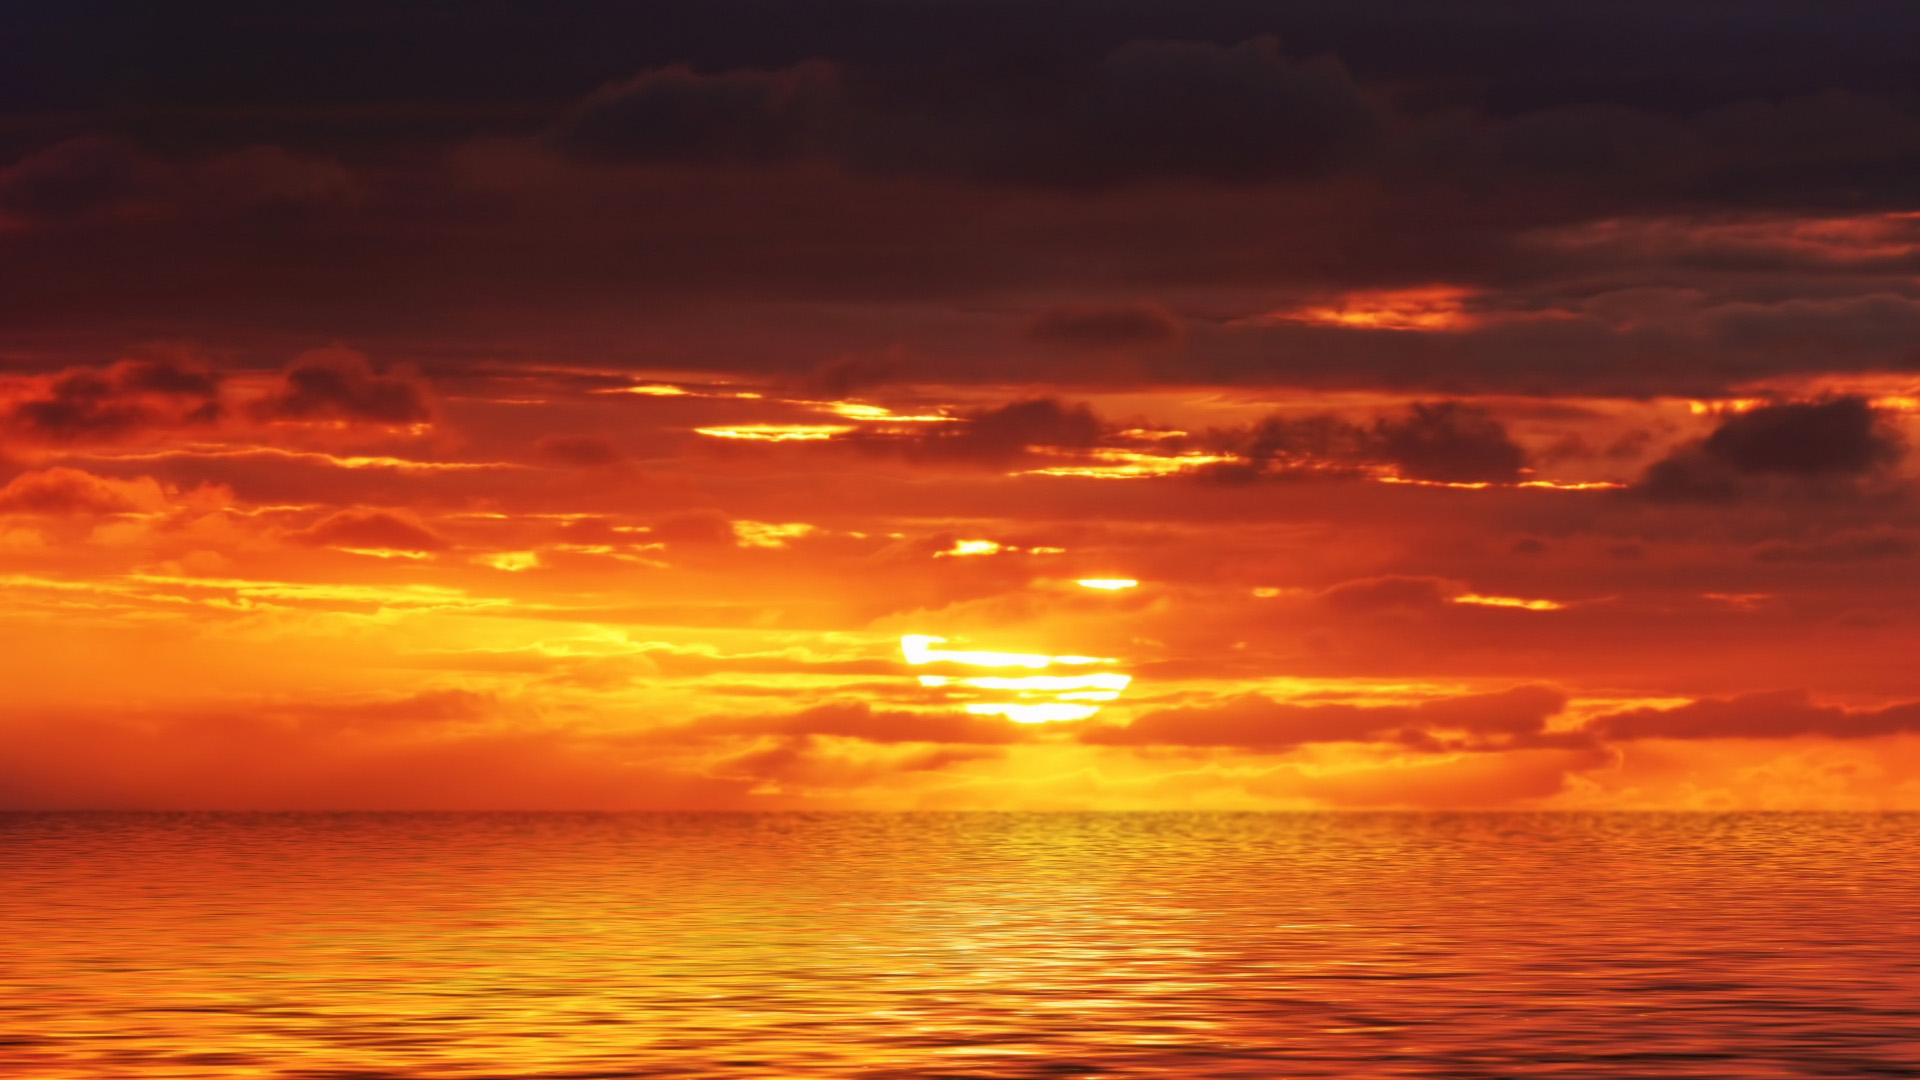  Sunset Background Picture   Free high quality background pictures